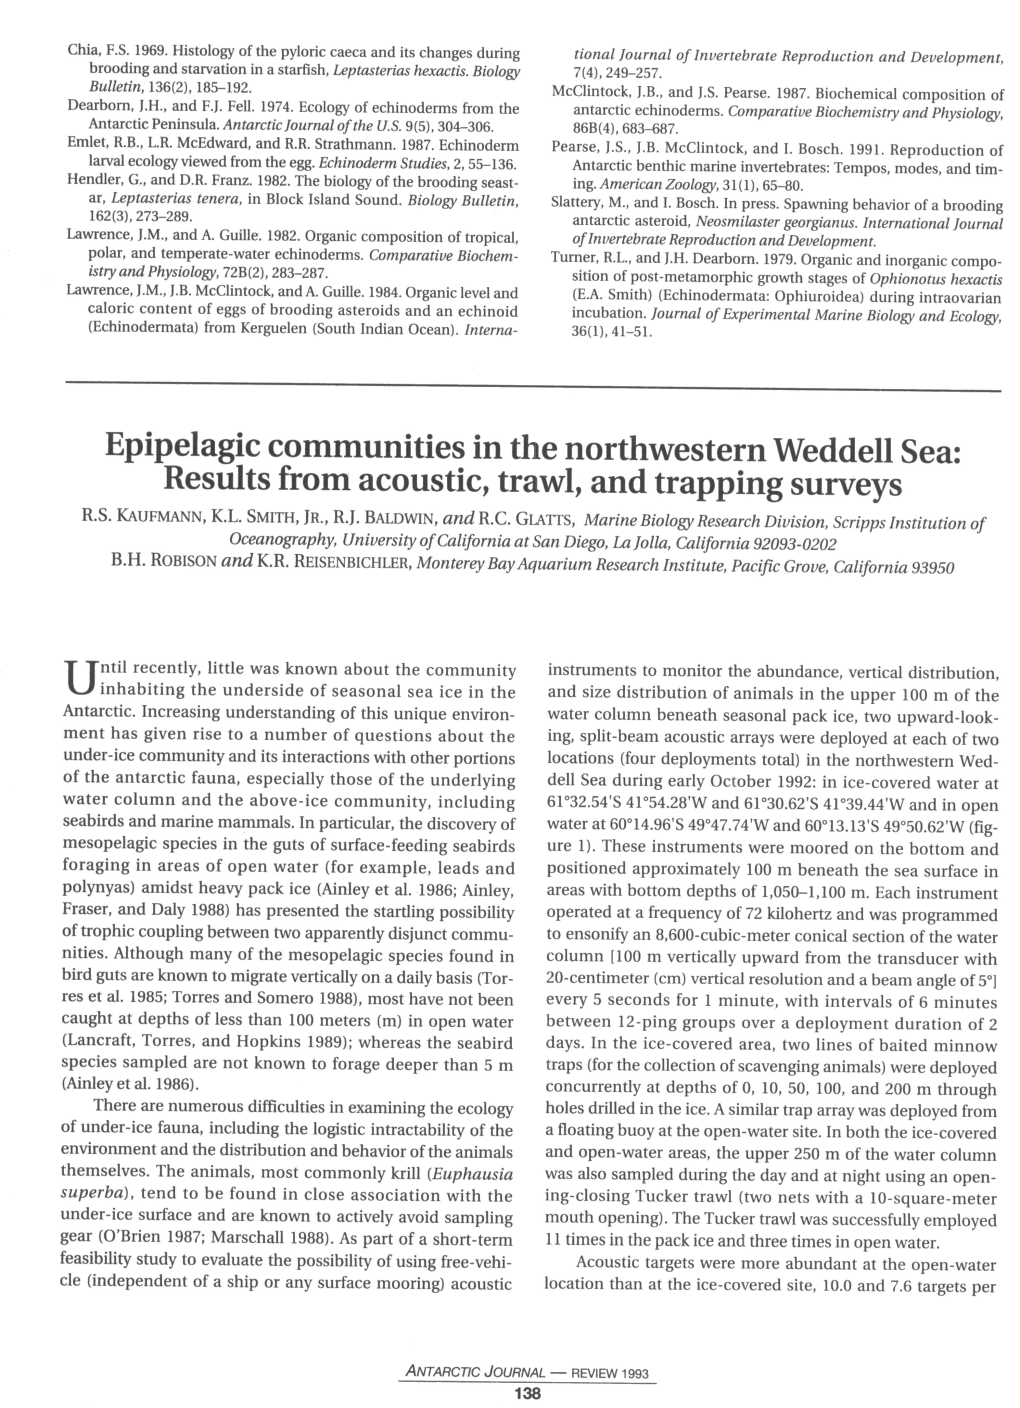 Epipelagic Communities in the Northwestern Weddell Sea: Results from Acoustic, Trawl, and Trapping Surveys R.S